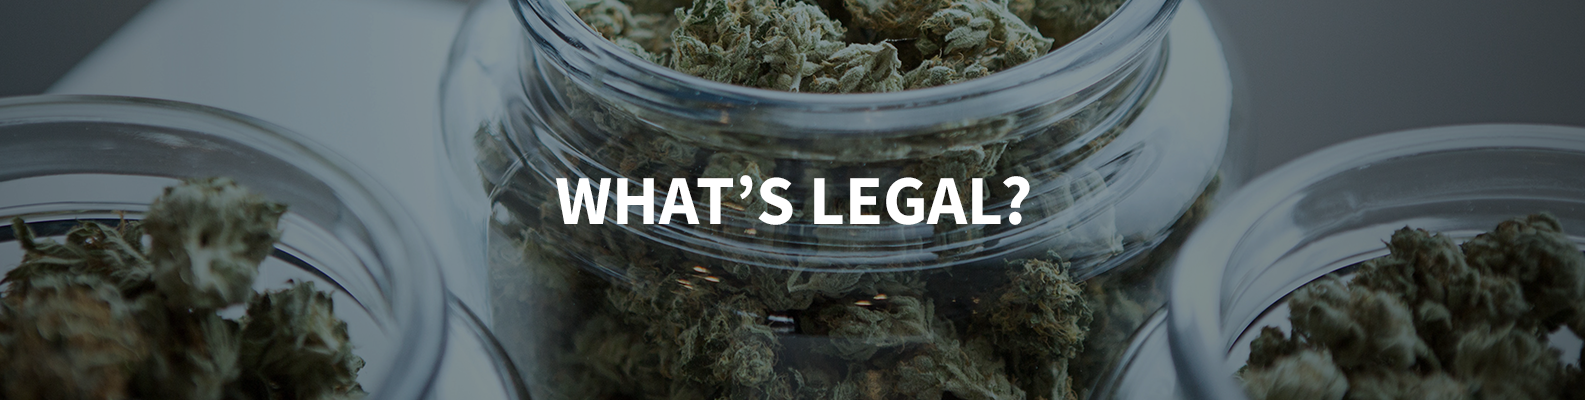 How Can You Buy Cannabis Legally?